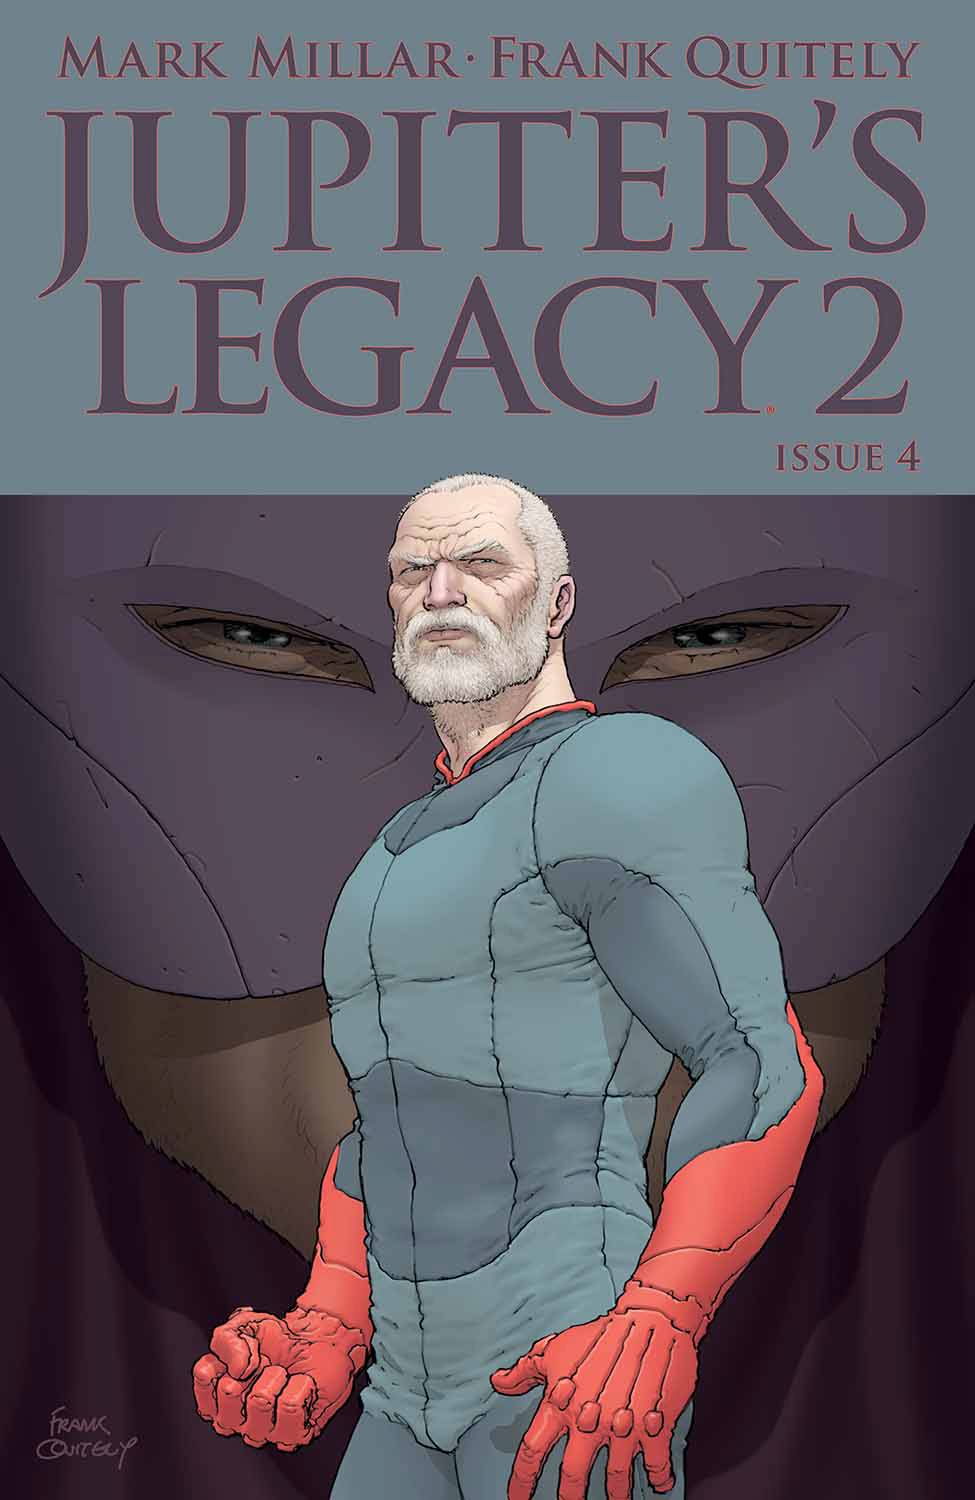 Jupiters Legacy Volume 2 #4 Cover A Quitely